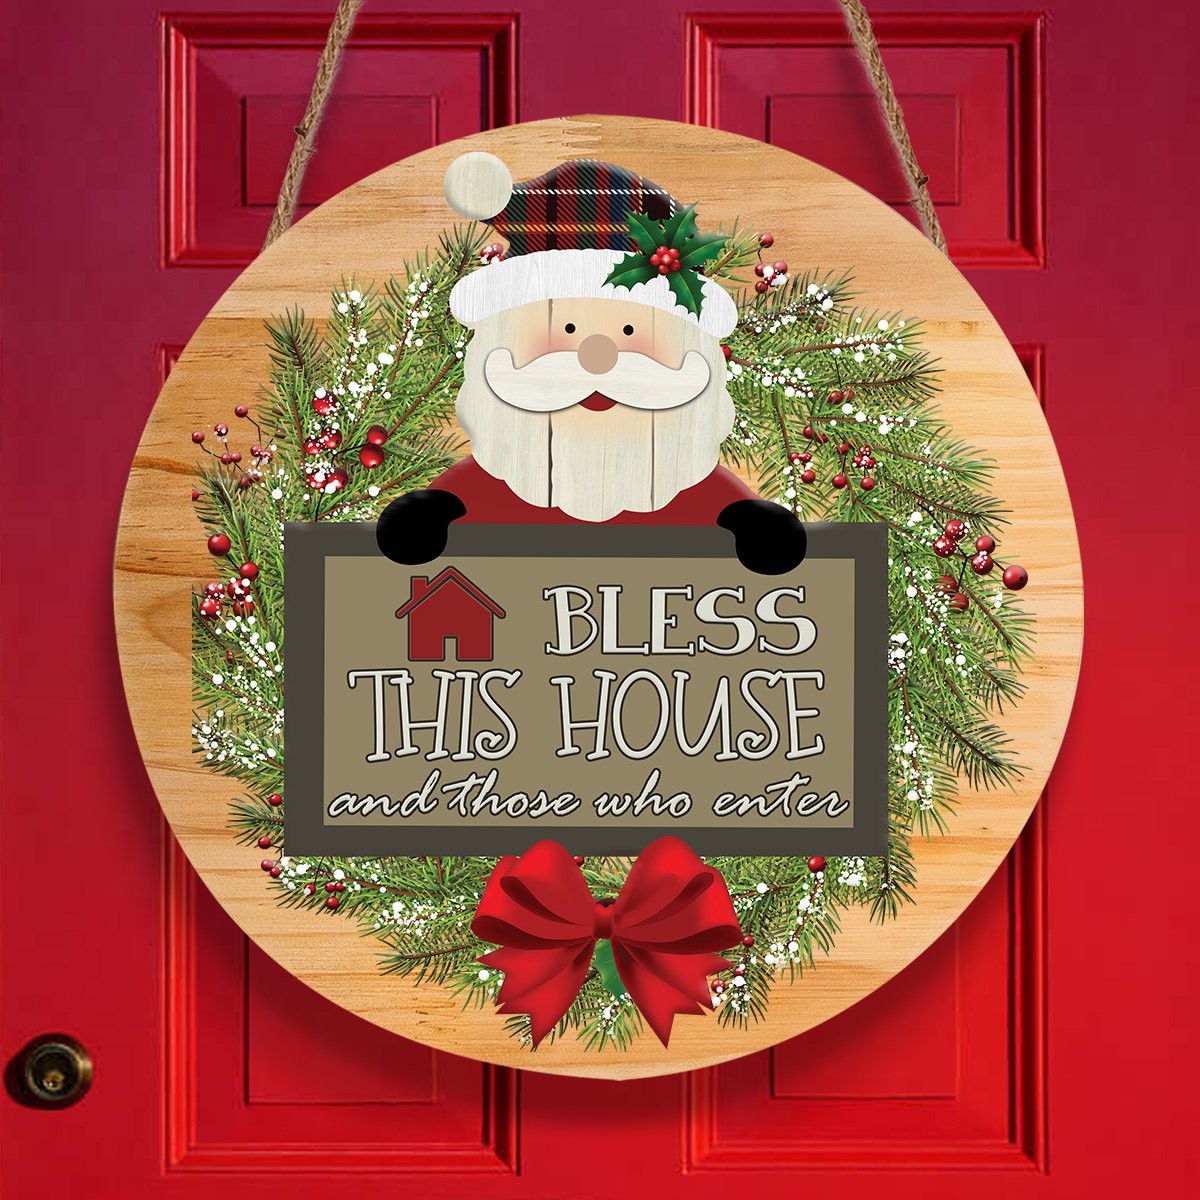 Christmas Bless This House Personalizedwitch Round Wood Sign Outdoor Decor